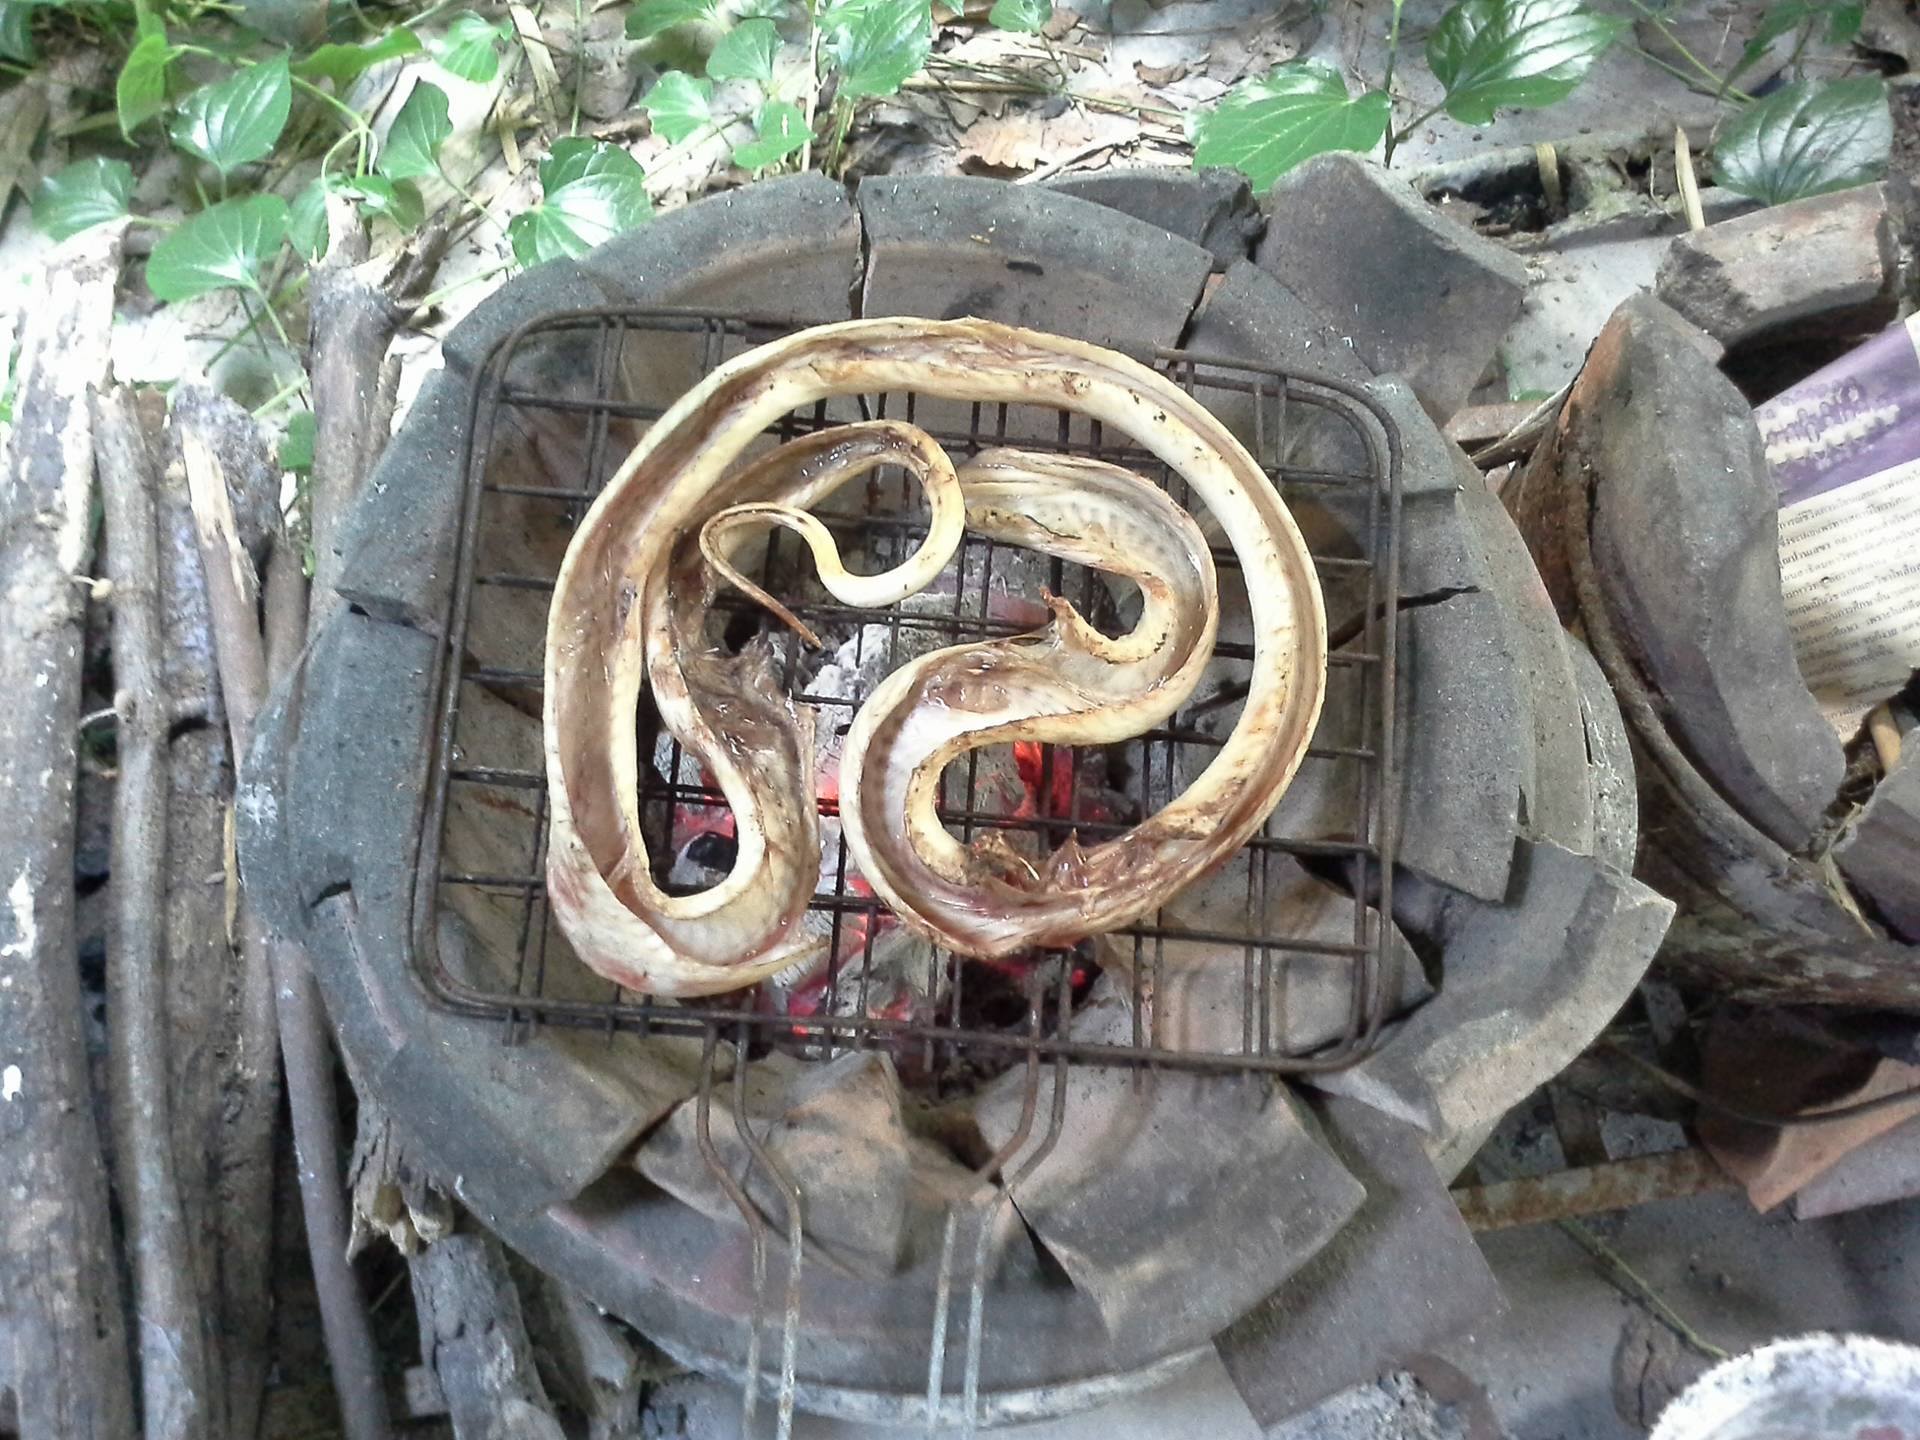 Skinned Cobra on the grill.